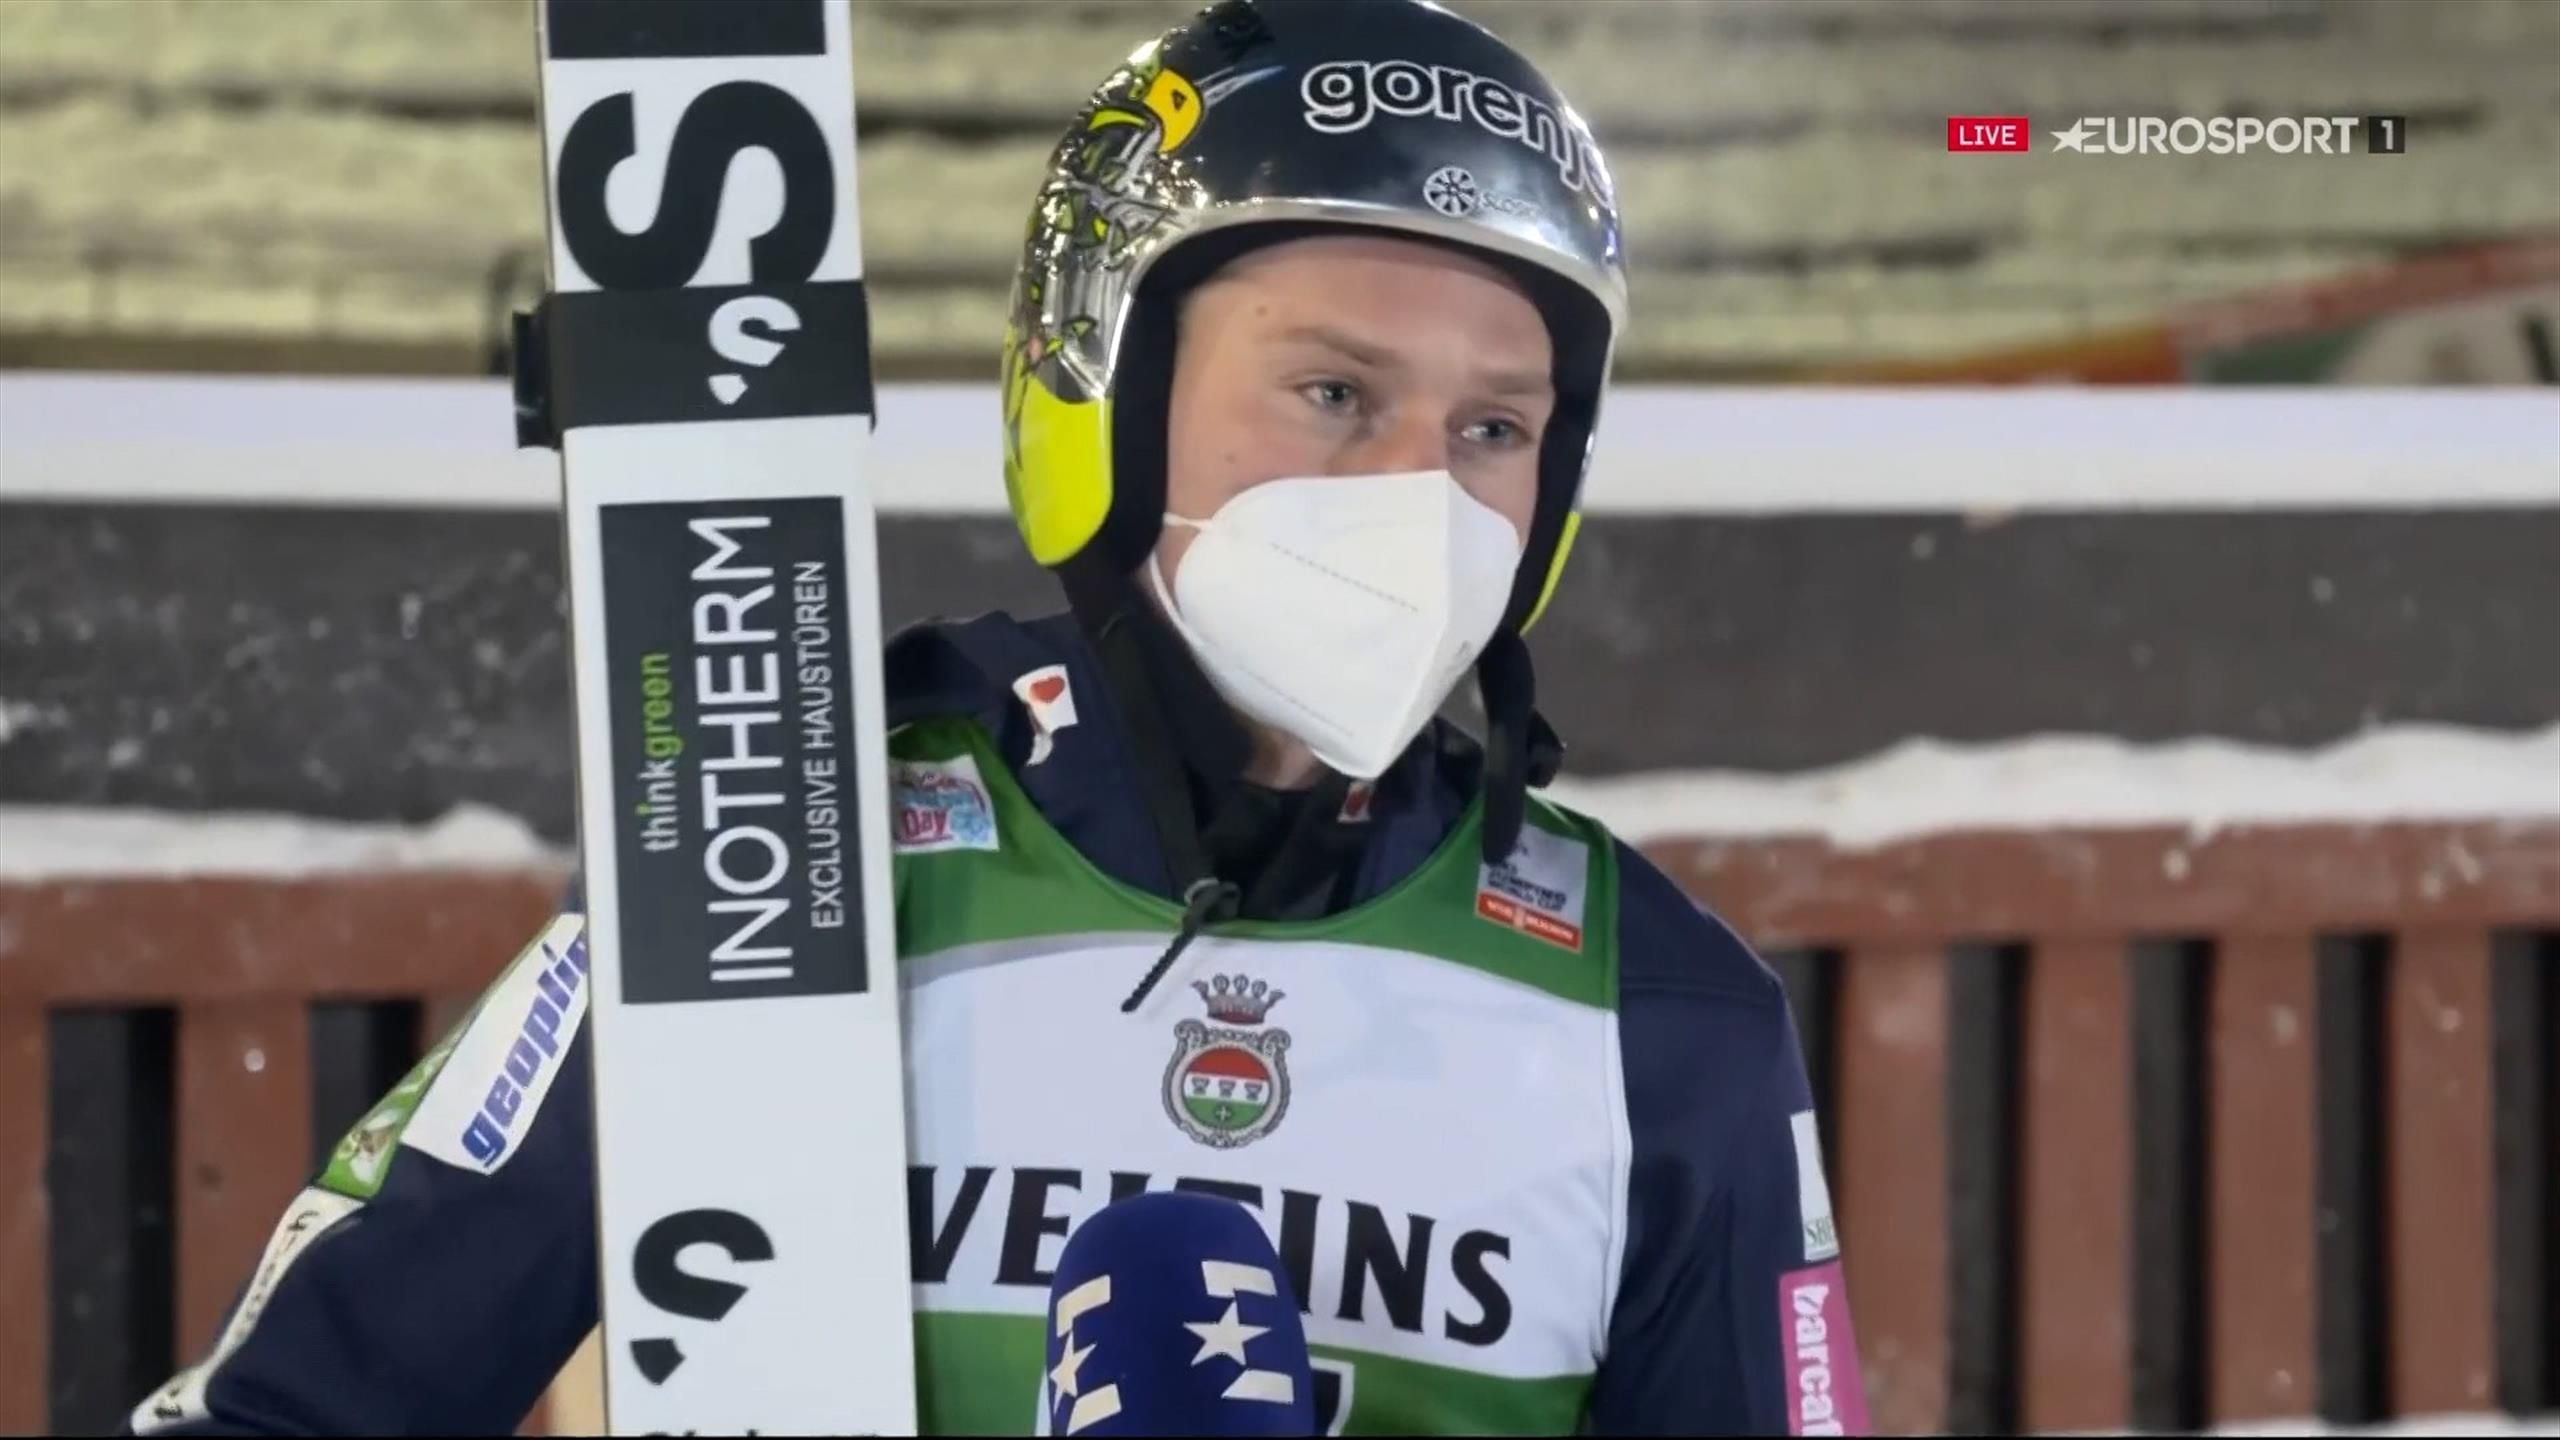 Anze Lanisek jumps to first World Cup gold in Ruka ahead of Karl Geiger and Markus Eisenbichler.